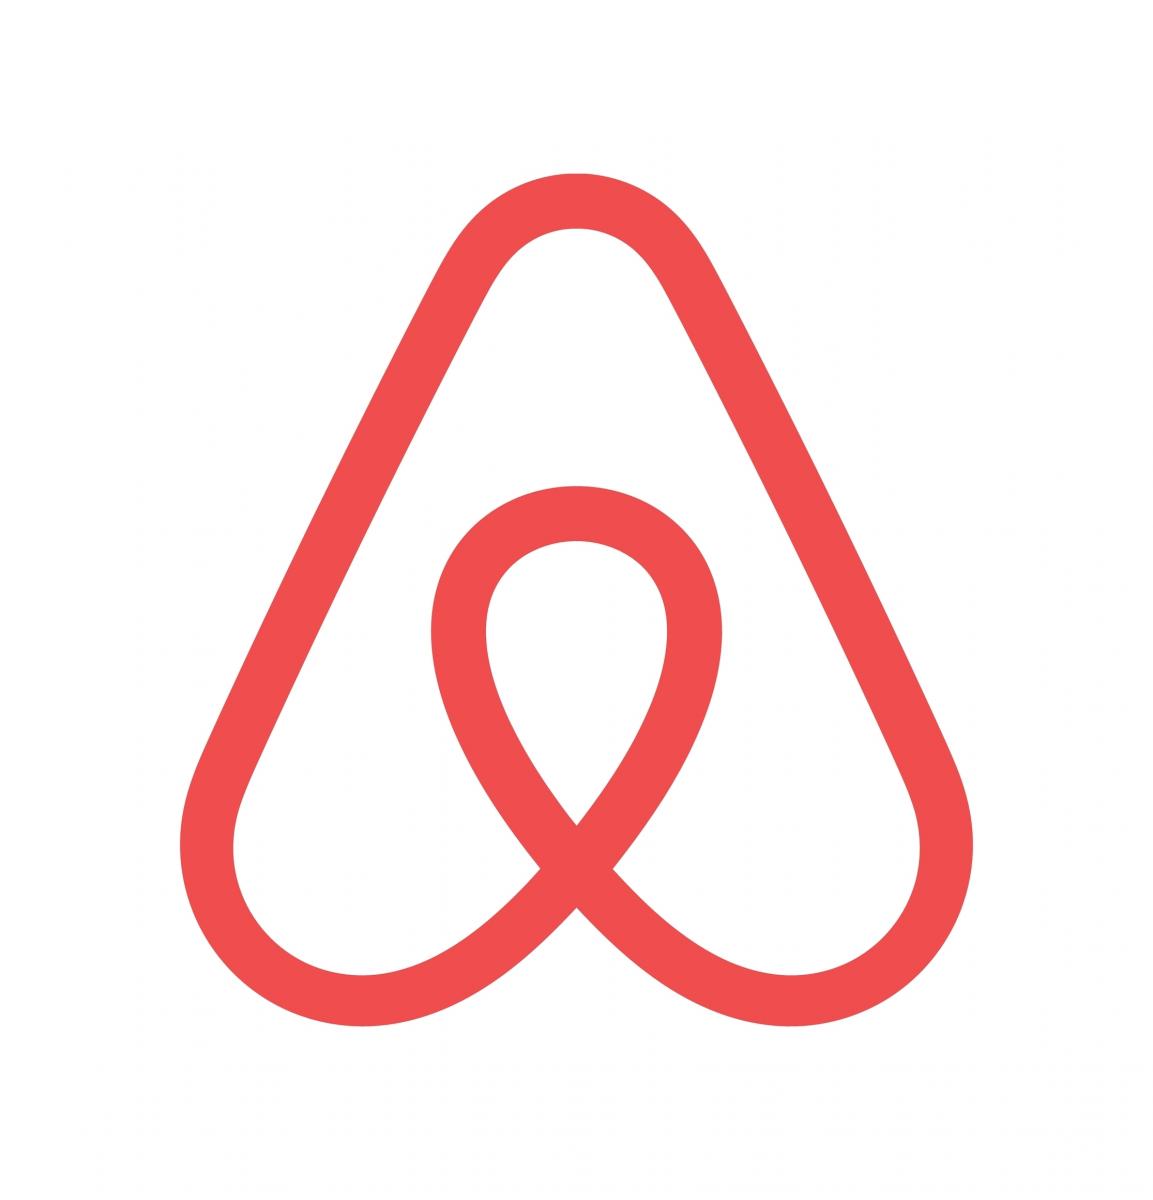 Agency urges second home owners to be Airbnb hosts for tax reasons 